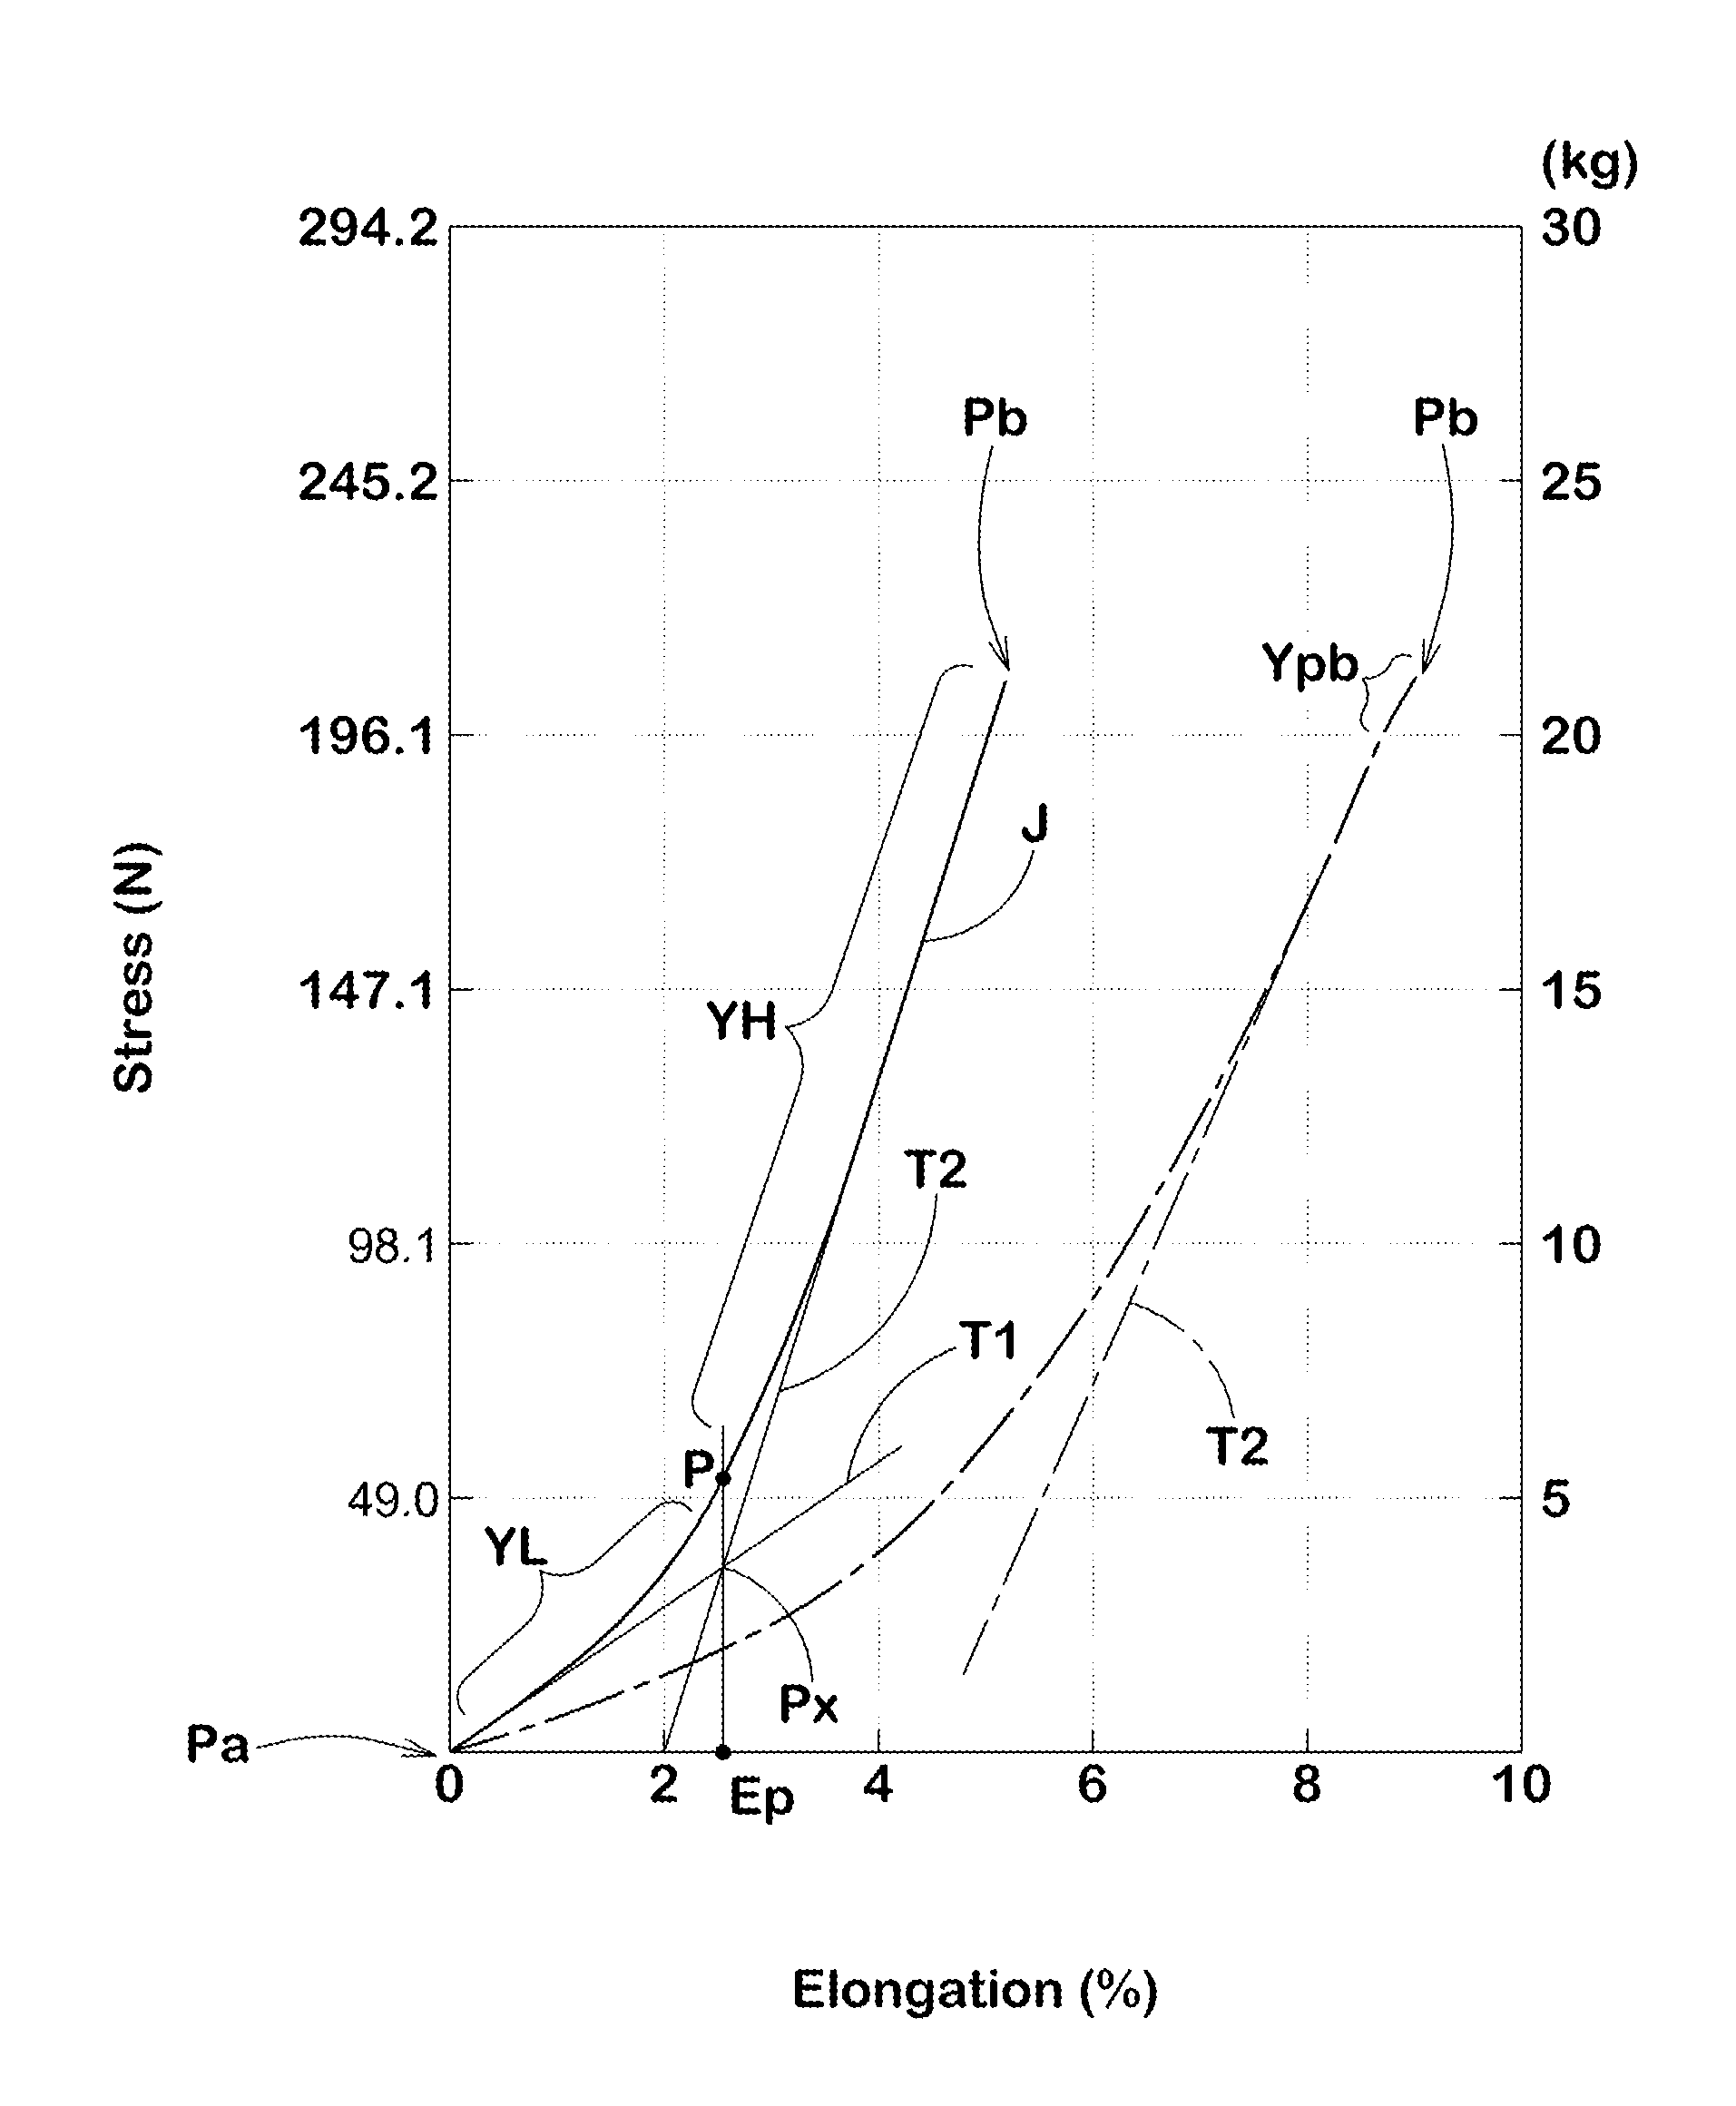 Method for manufacturing pneumatic tire